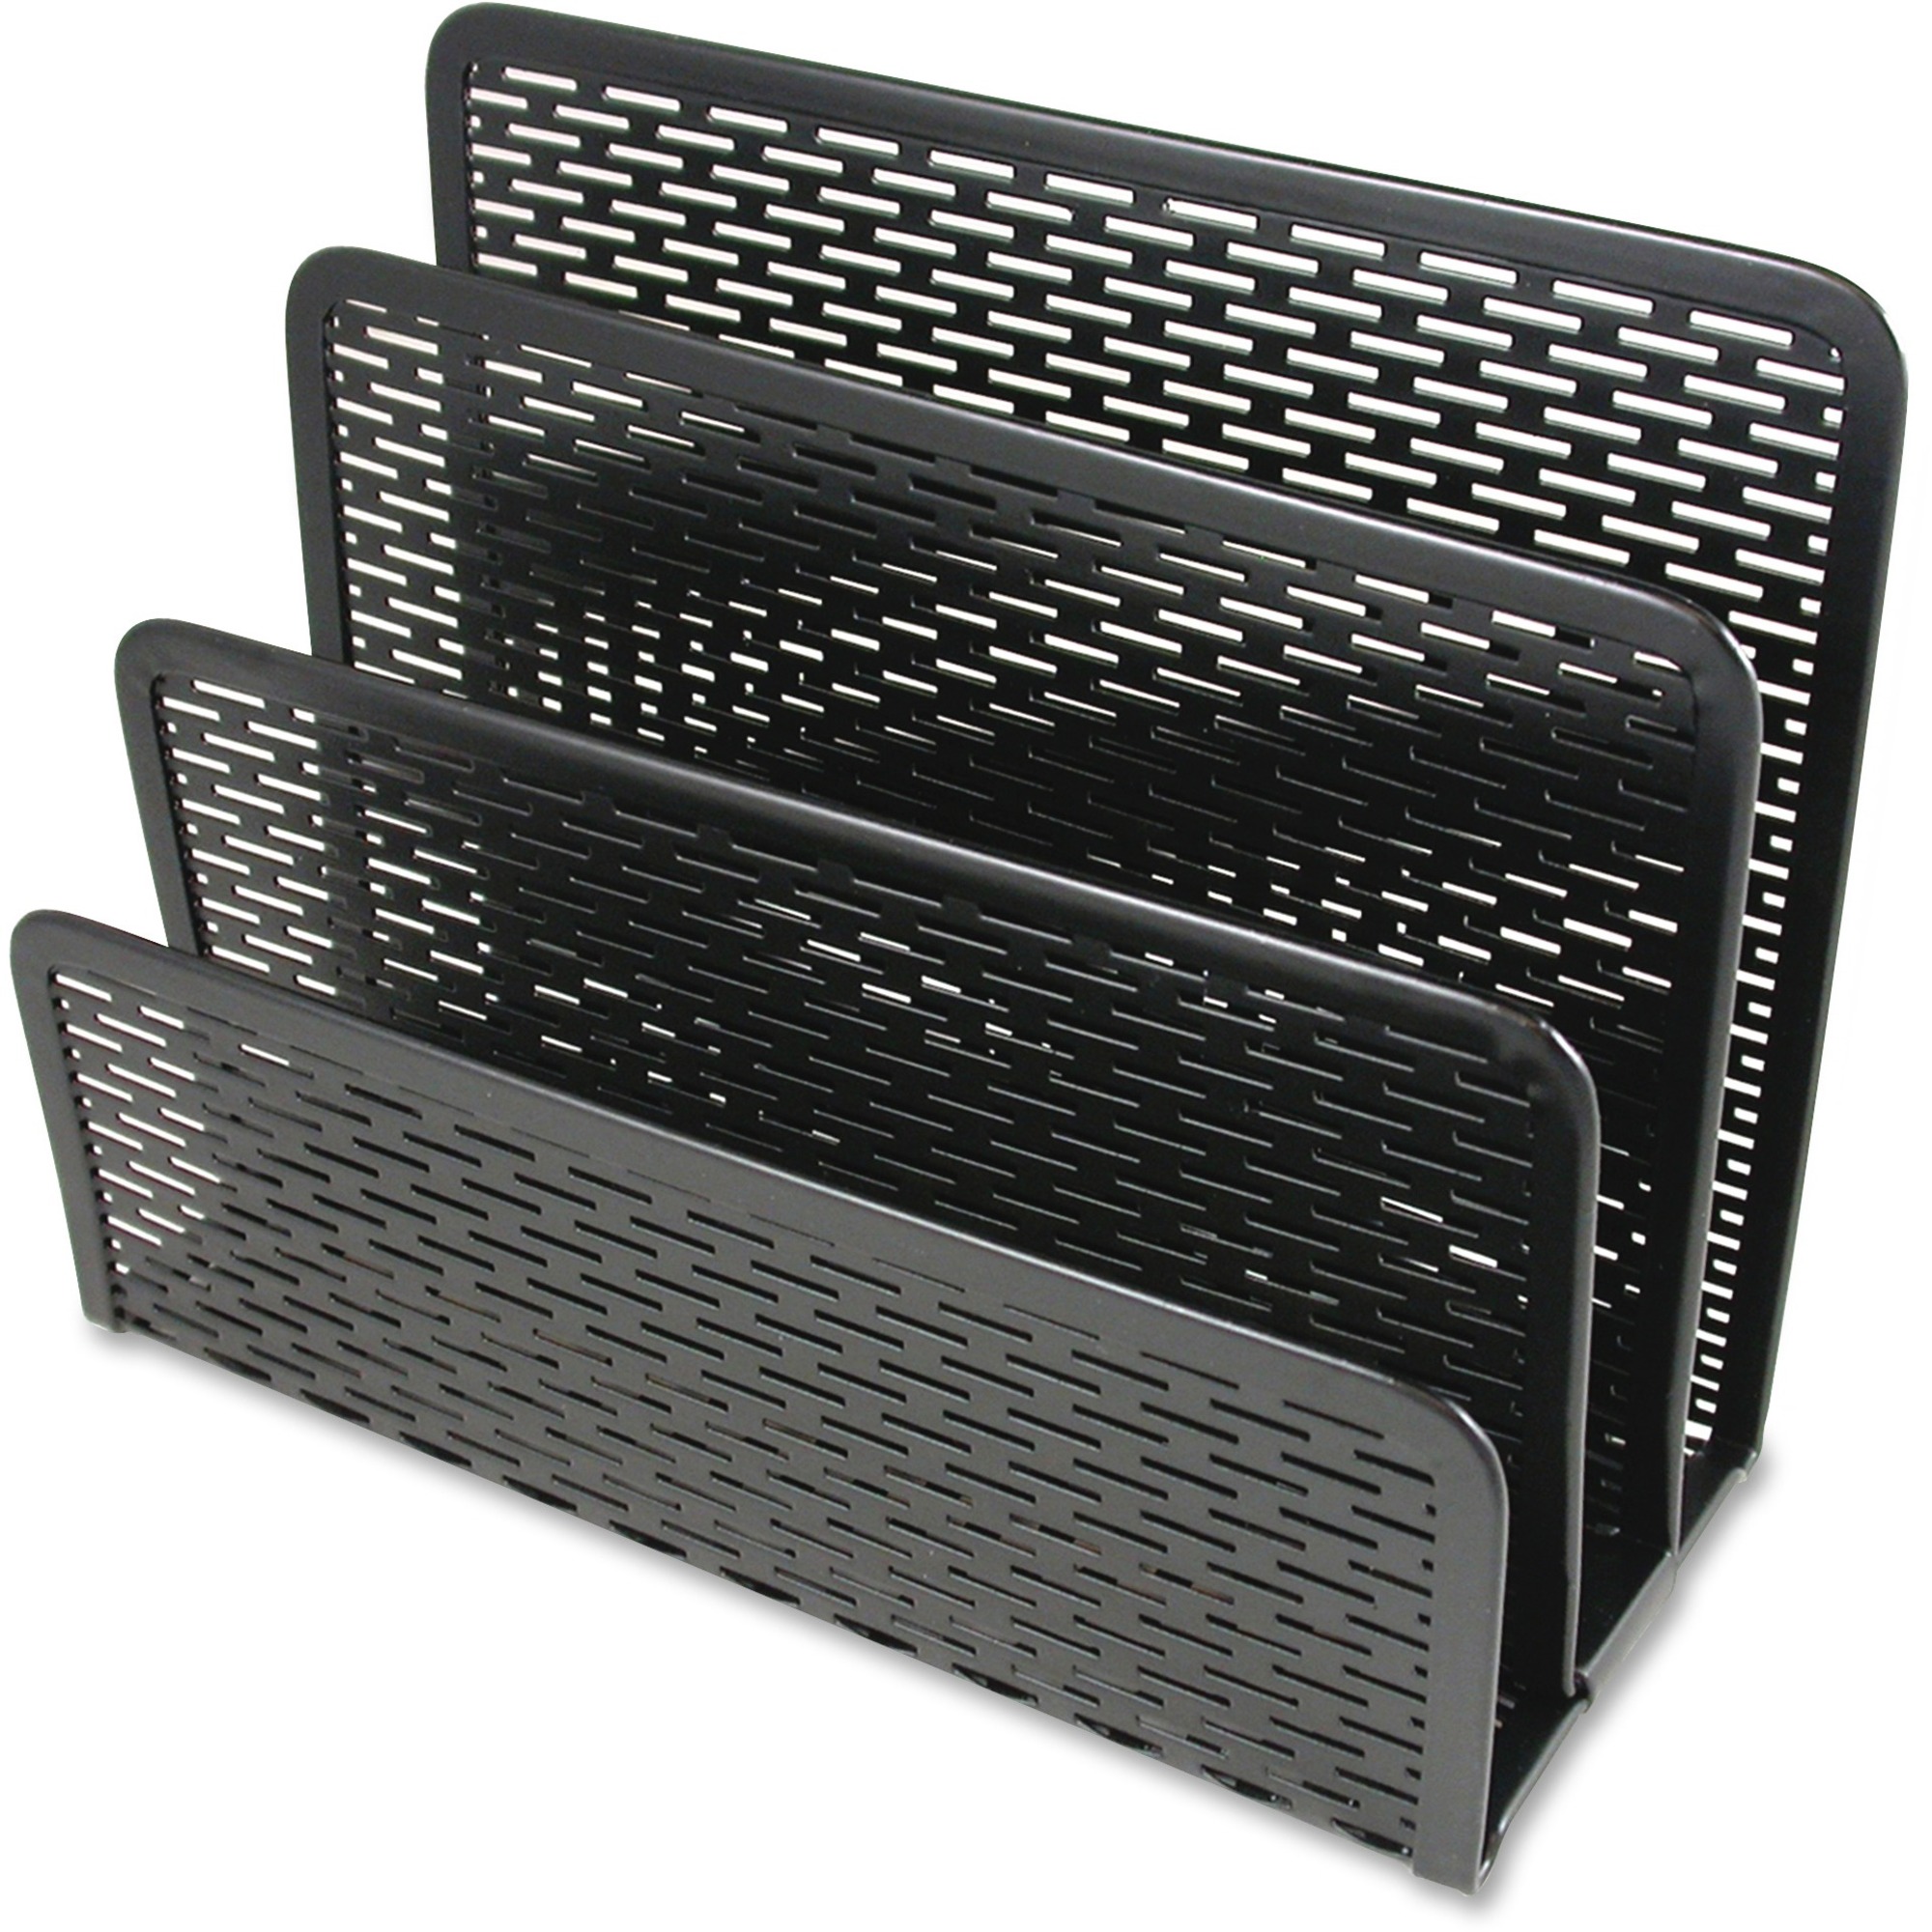 Artistic 3-compartment Punched Metal Letter Sorter - Each